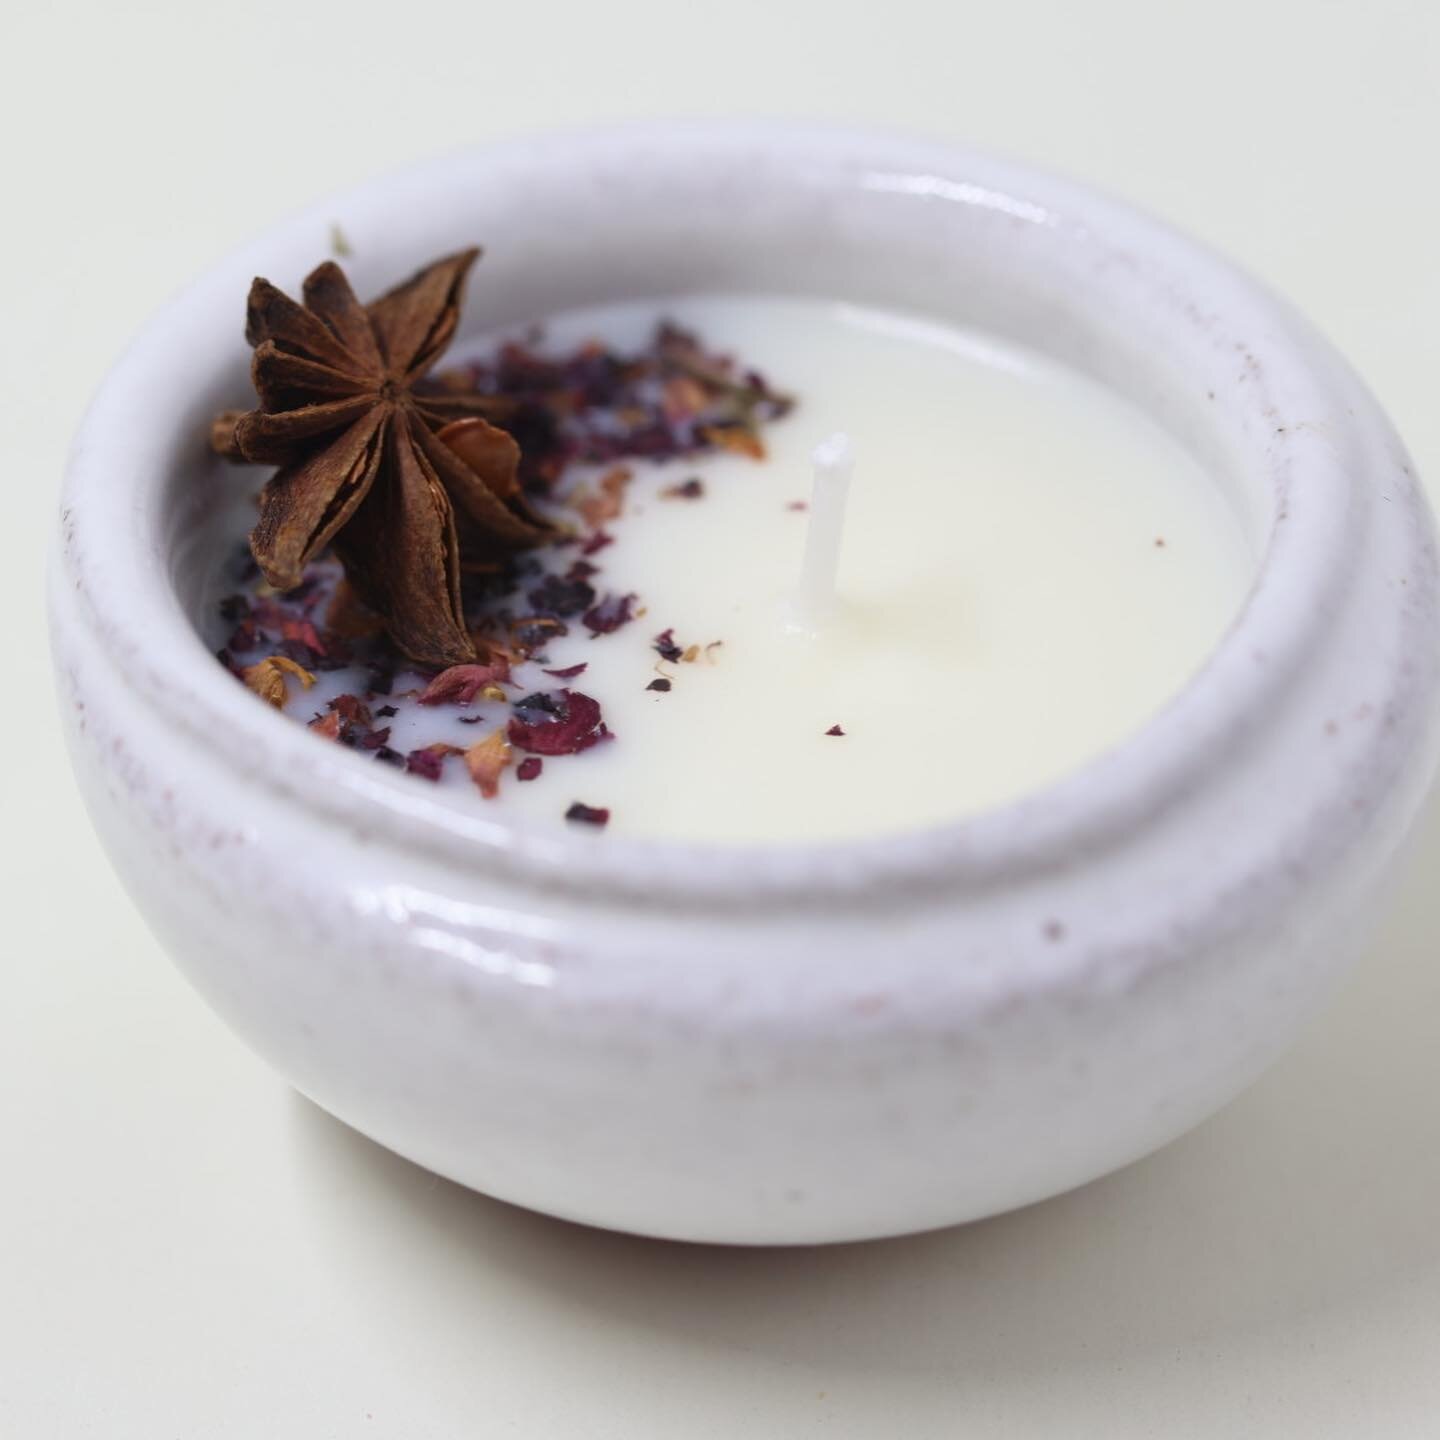 Now selling spiced fragrance ceramic candles on our site!
Limited supply. Only $20 for this handcrafted gift.
.
.
Homemade soy wax blend eco friendly and paraben free. 

Each piece the candle is poured into is handmade ceramic. Meant to be repurposed